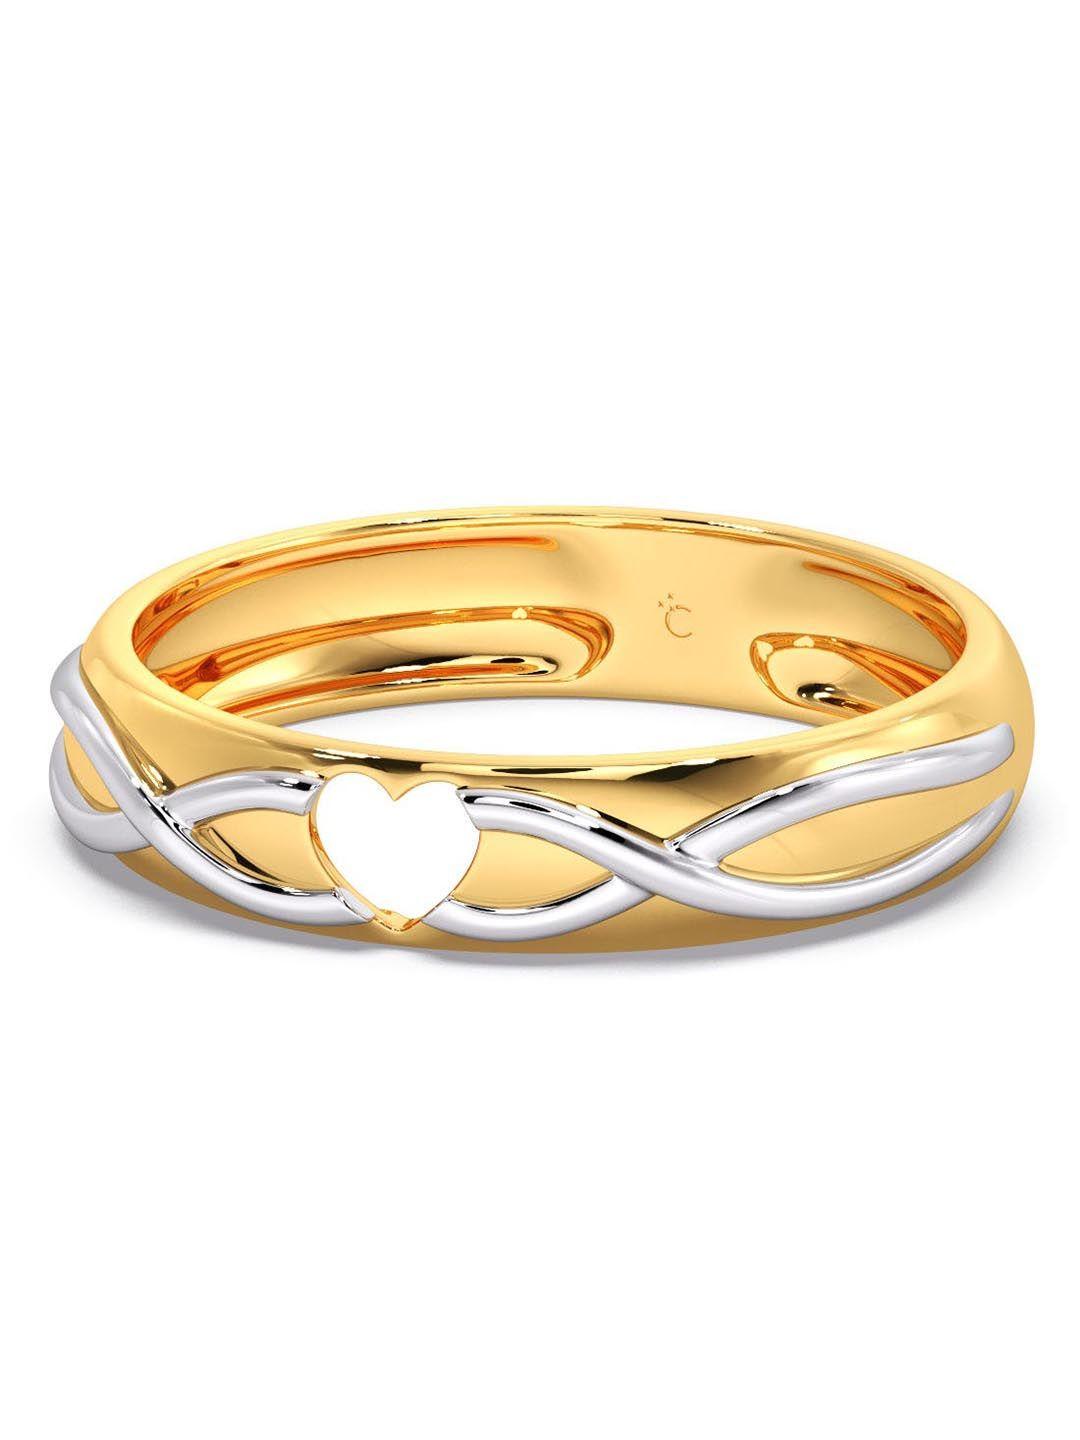 candere a kalyan jewellers company 14kt gold finger ring-2.64gm